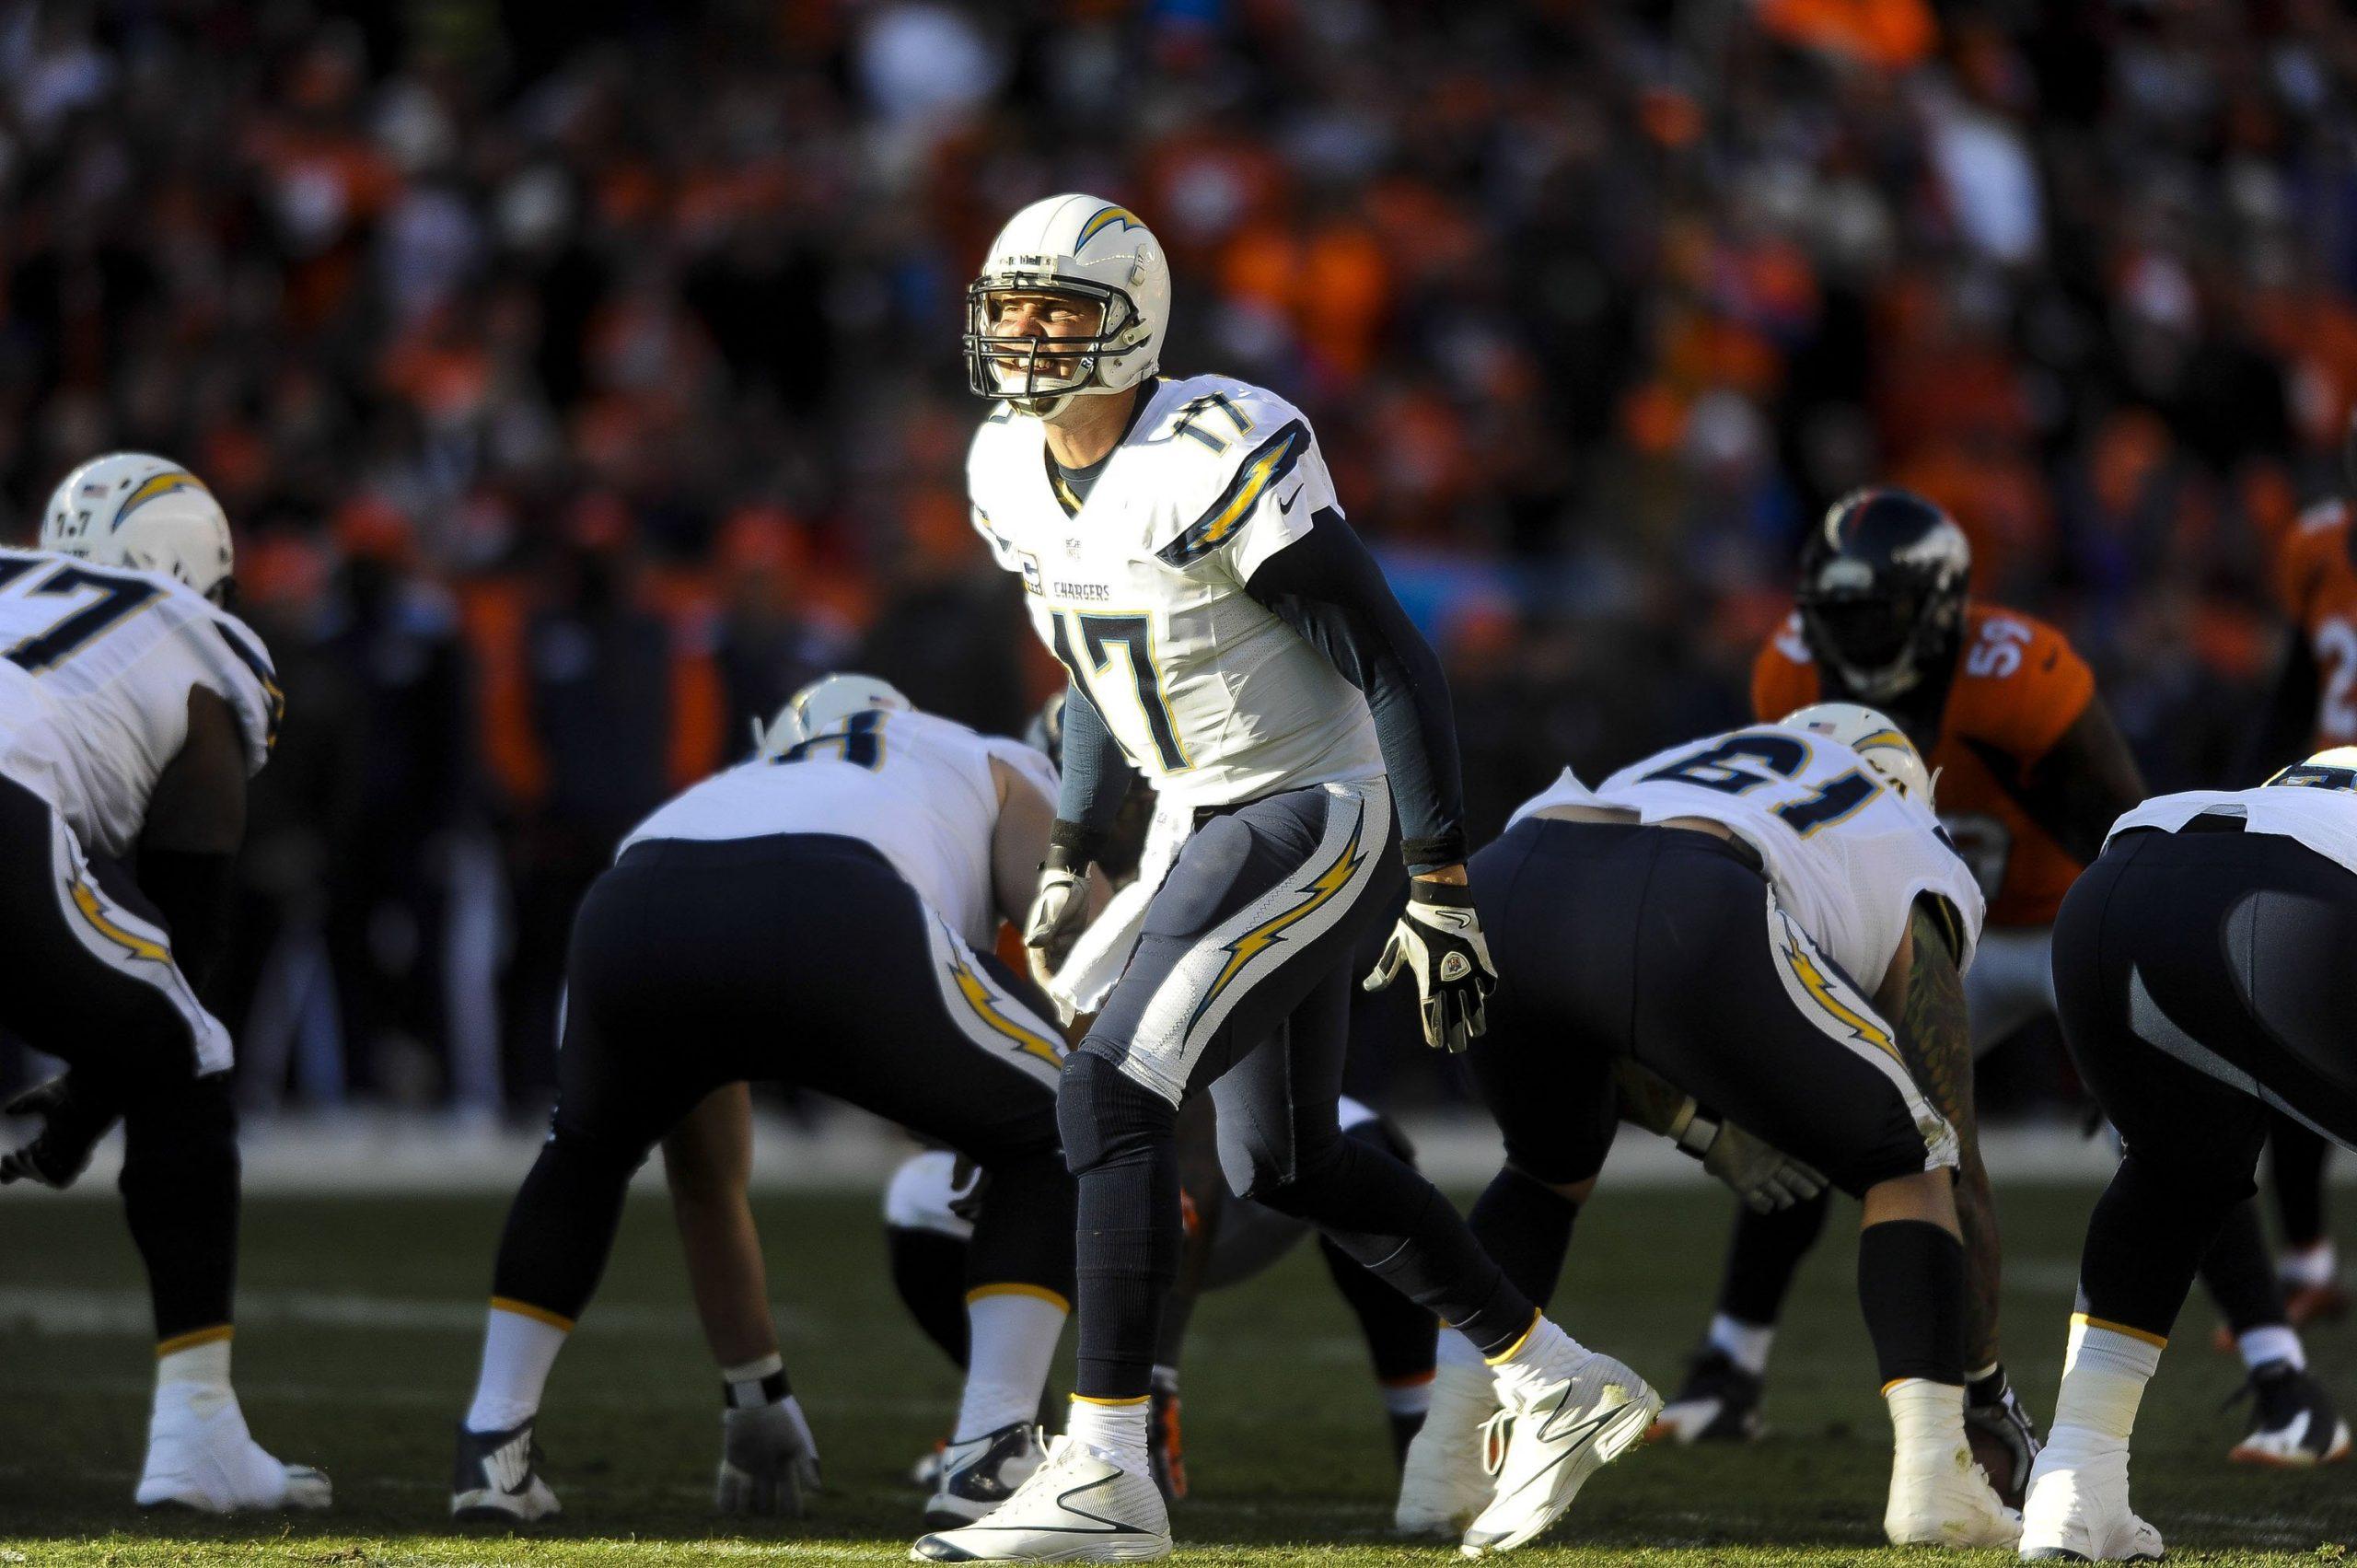 San Diego Chargers quarterback Phillip Rivers yells at his team during the AFC divisional playoffs against the Denver Broncos in Denver on Sunday, Jan. 12, 2014. (Michael Ciaglo/Colorado Springs Gazette/MCT)